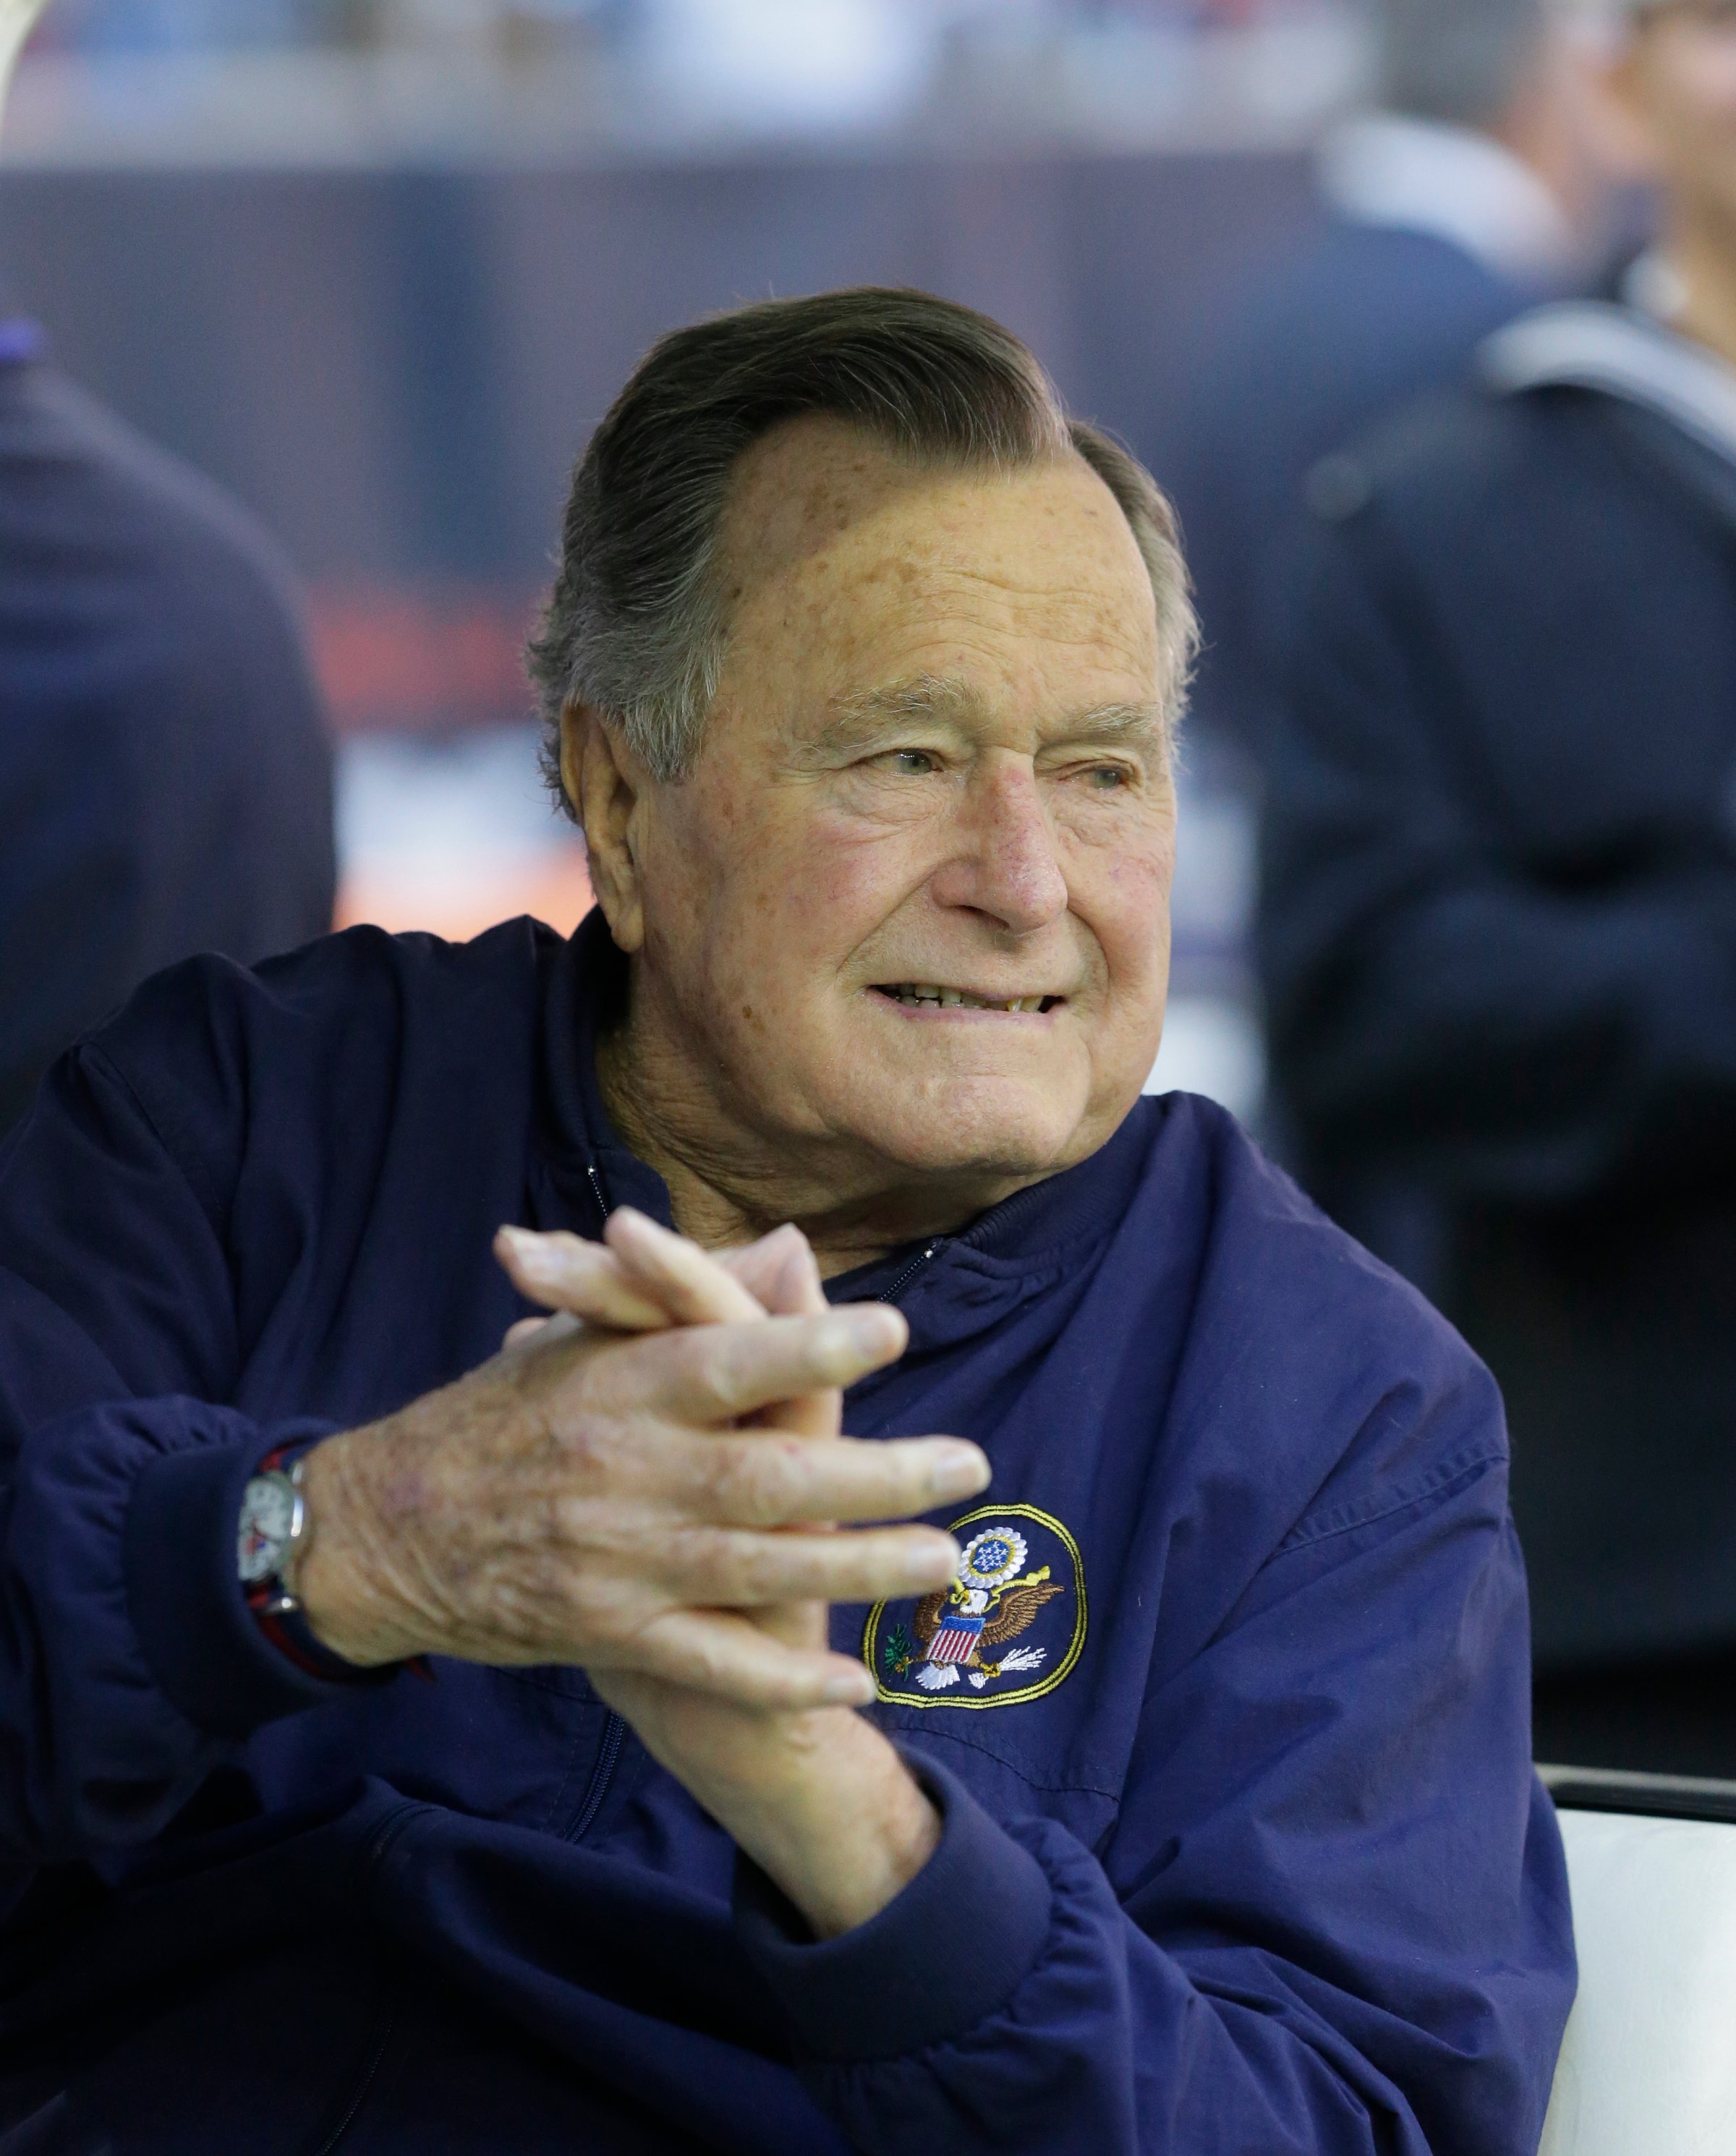 Former president George H. W. Bush attends an NFL football game between the Houston Texans an Cincinnati Bengals on Nov. 23, 2014, in Houston.